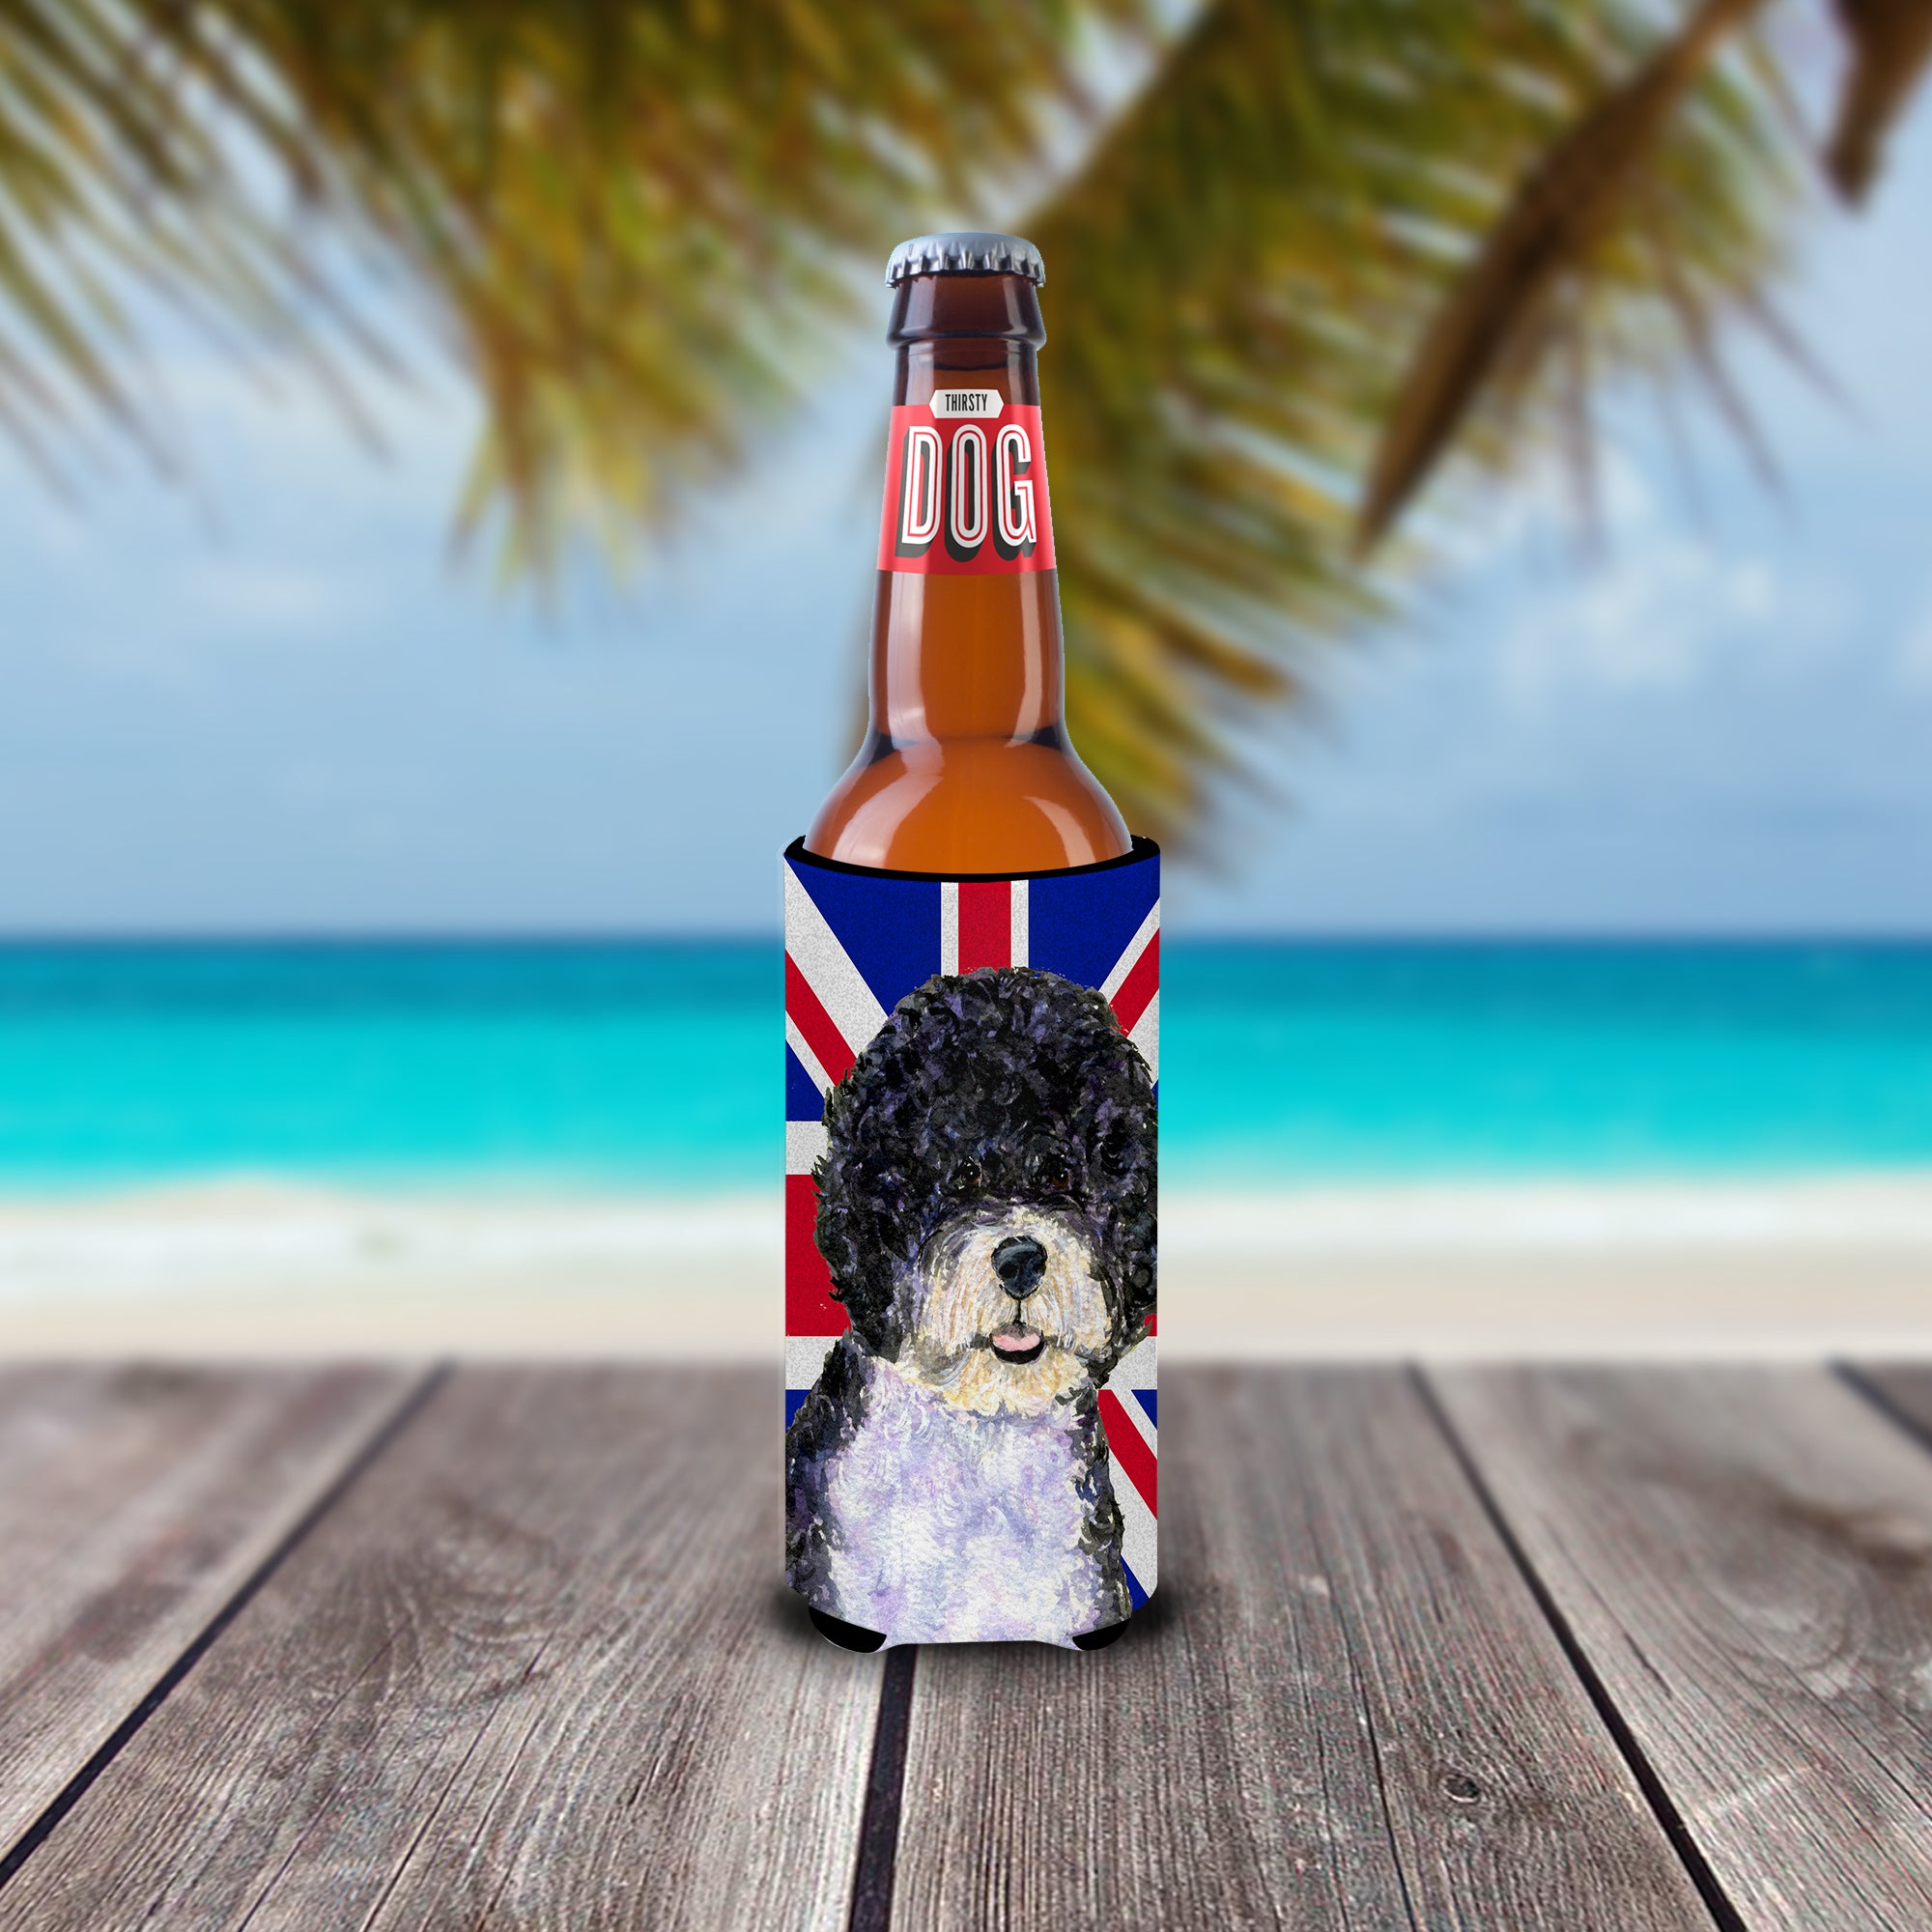 Portuguese Water Dog with English Union Jack British Flag Ultra Beverage Insulators for slim cans SS4932MUK.